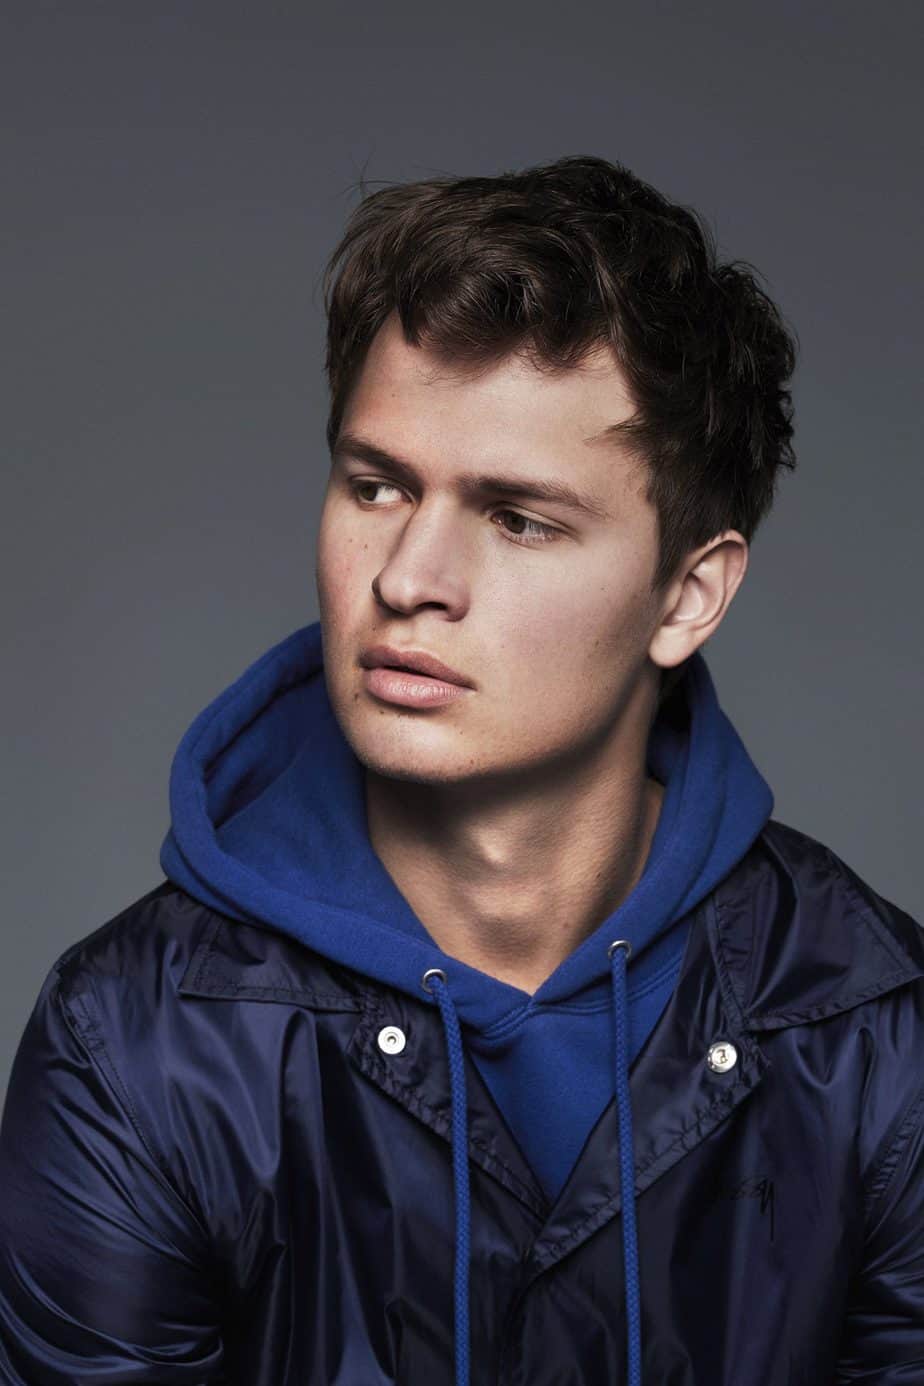 Ansel posing for a photoshoot.